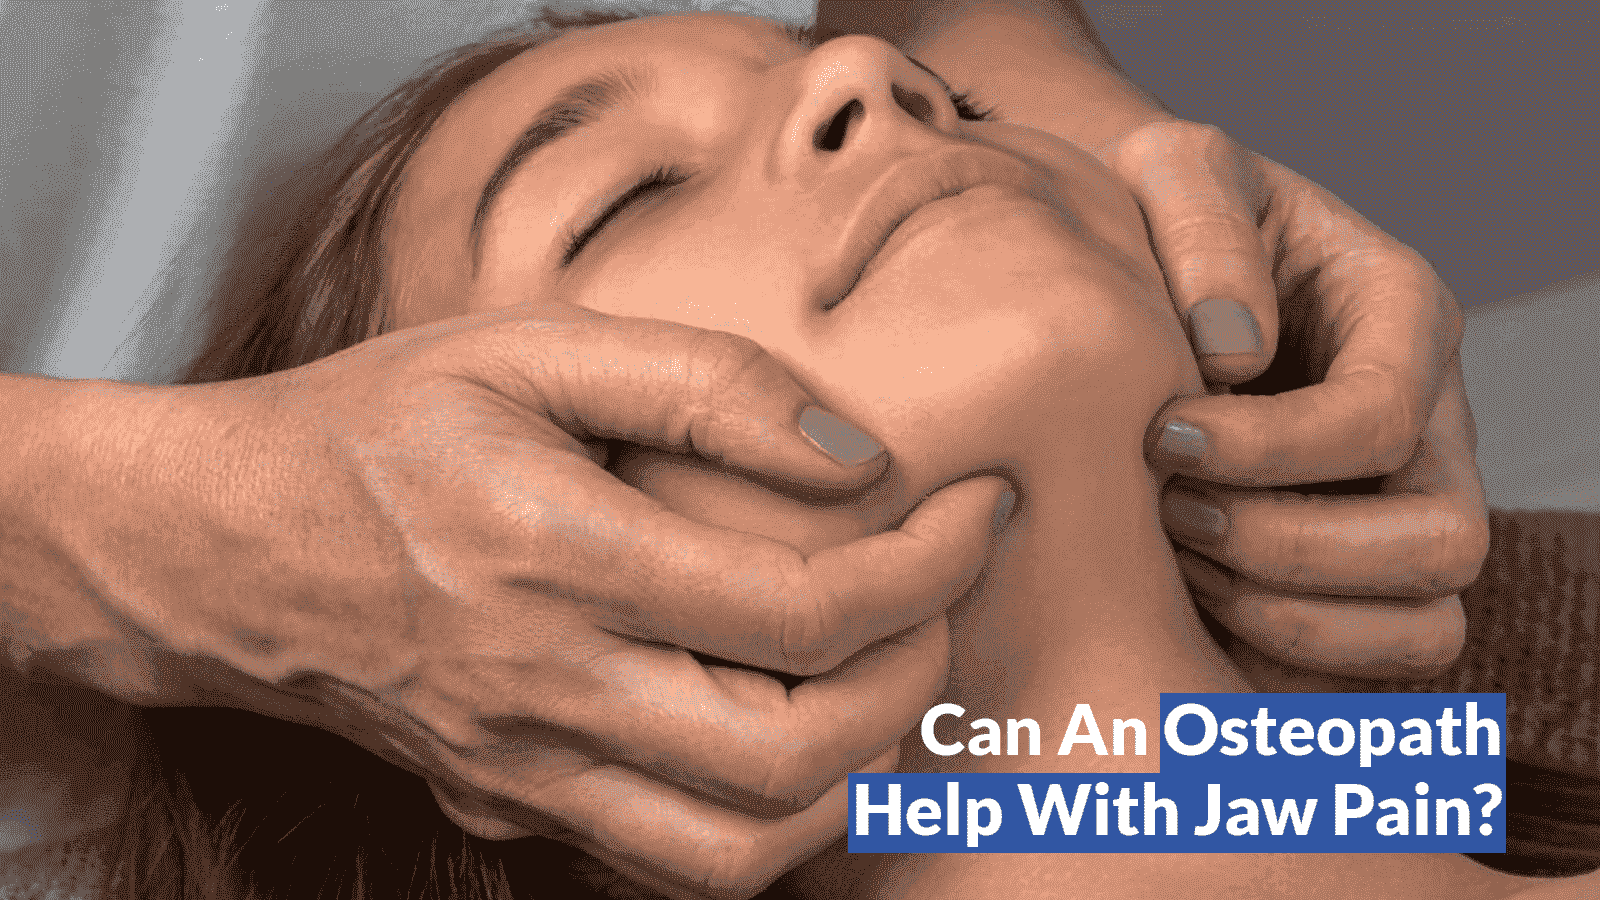 Osteopath help with jaw pain